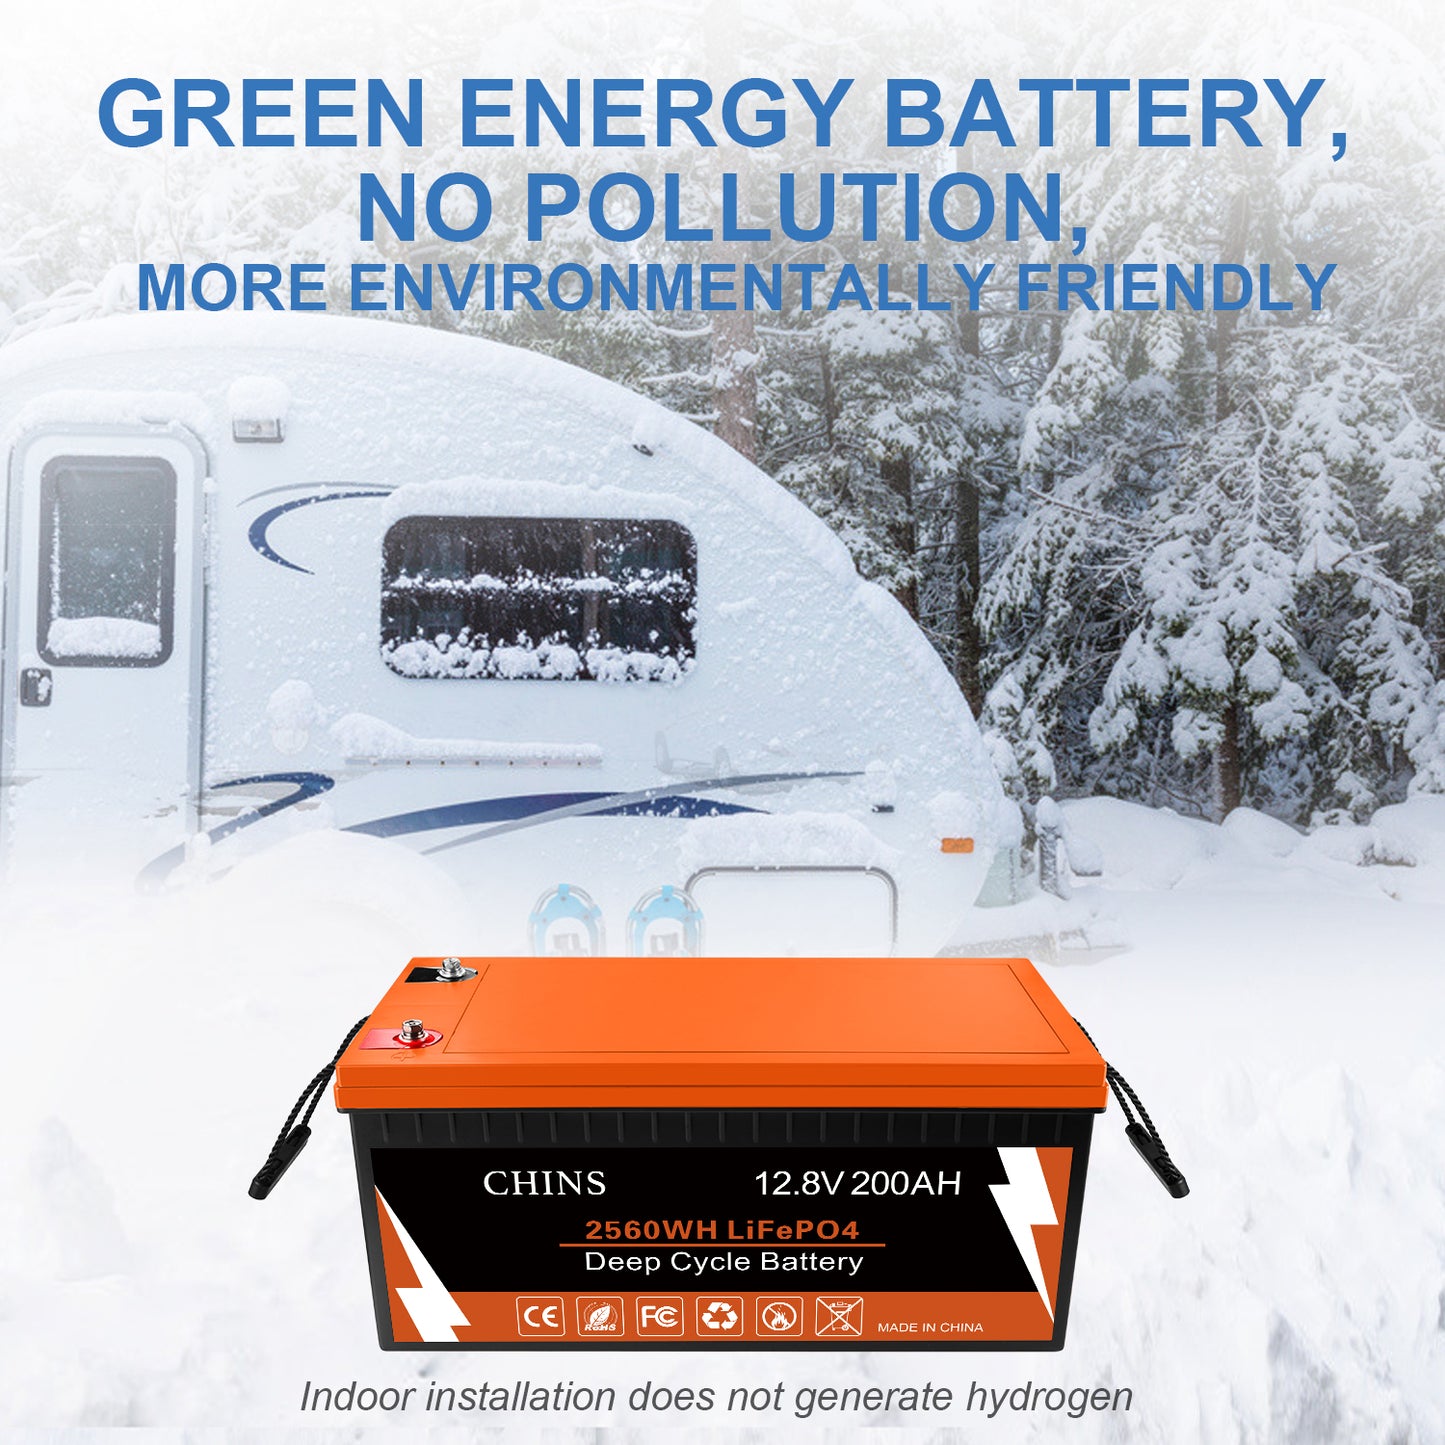 CHINS Smart 12.8V 200Ah LiFePO4 Lithium Battery, Support Low Temperature Charging (-31°F), Built-in 100A BMS, 2000+ Cycles, Mobile Phone APP Monitors Battery SOC Data